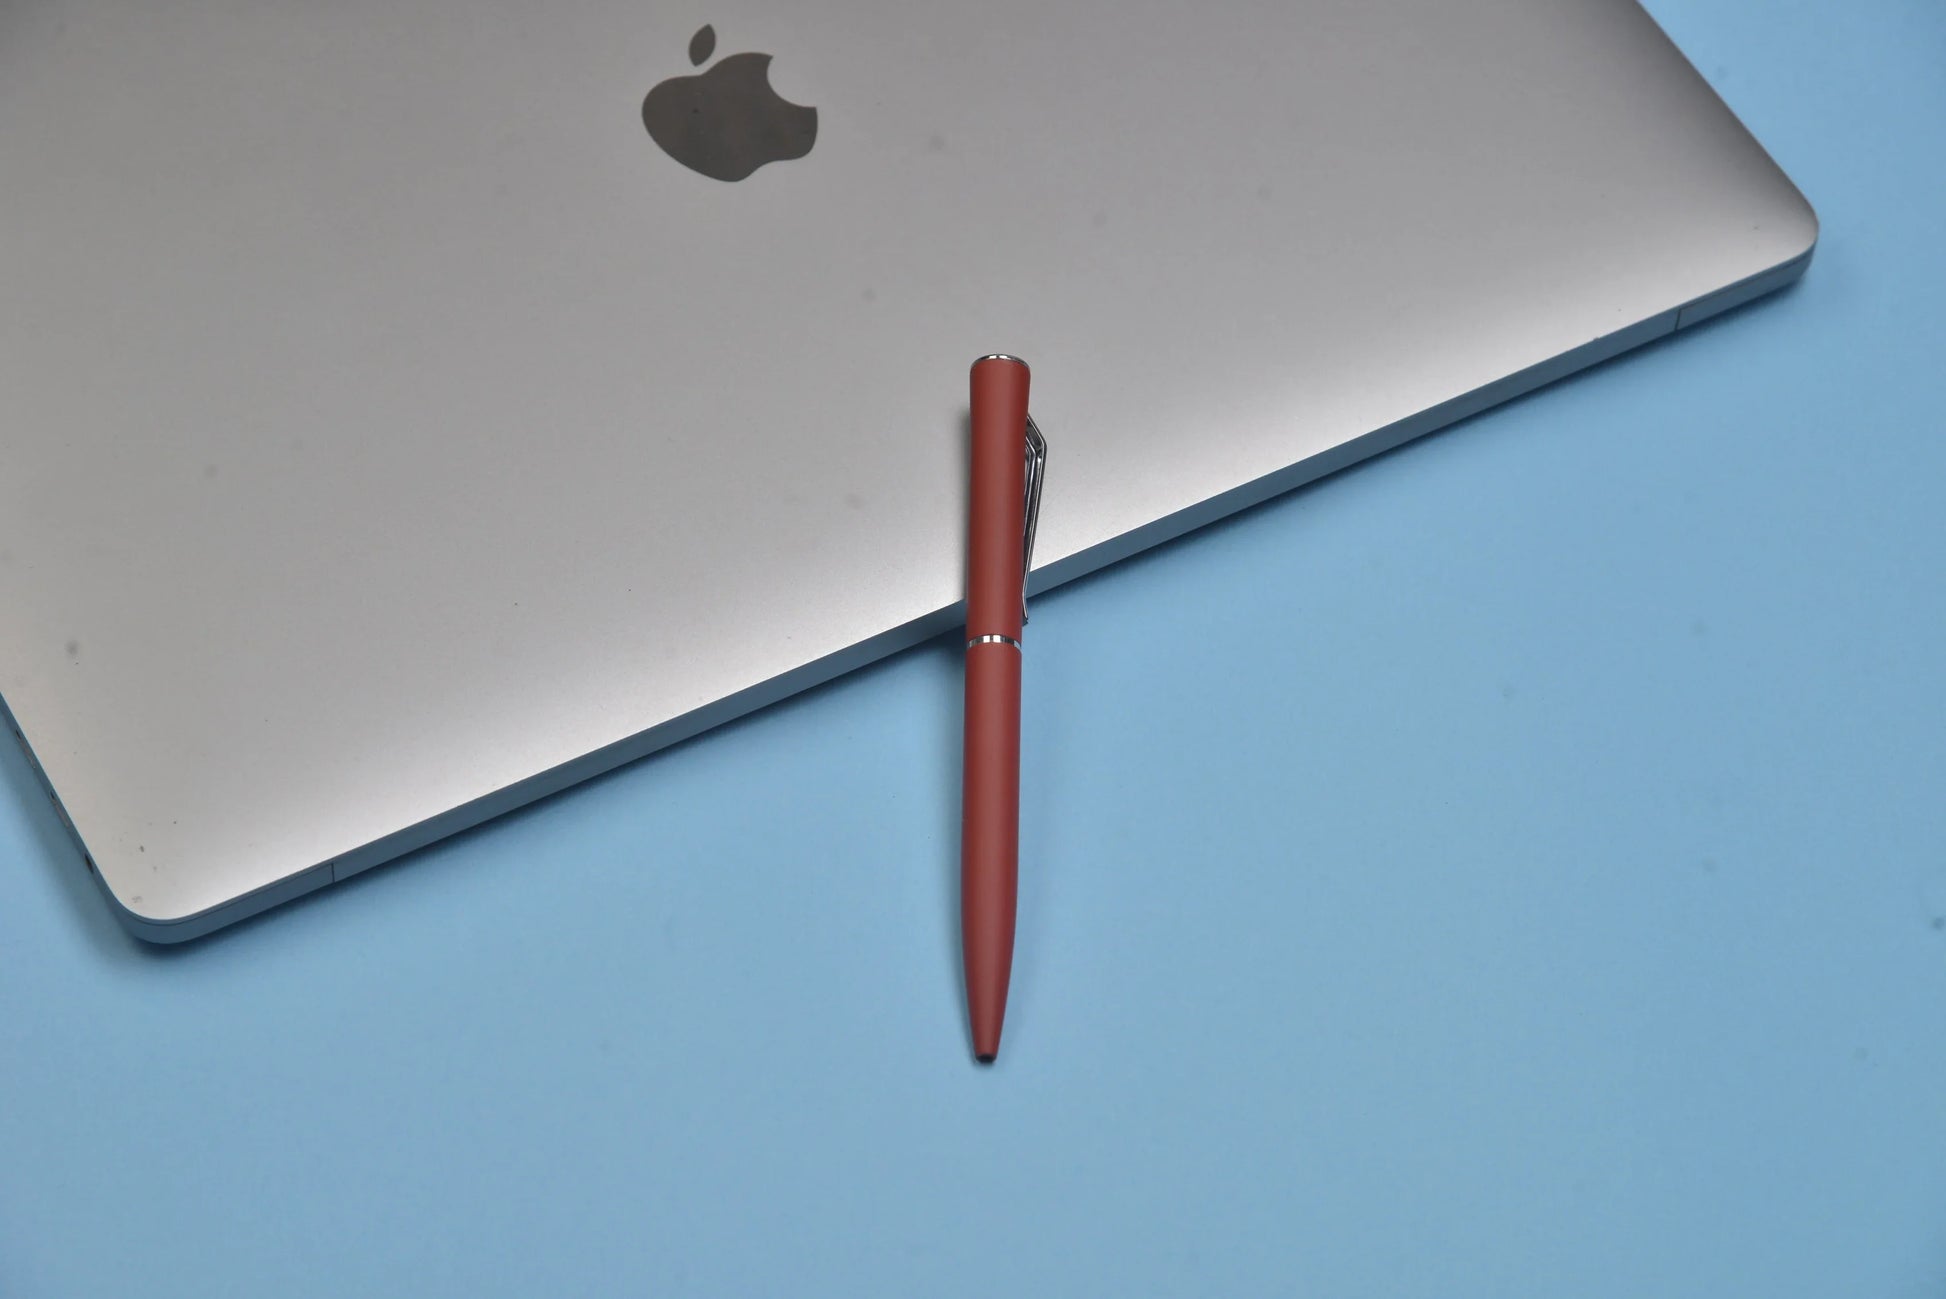 "Add a touch of sophistication to your writing with this custom-made pen. Choose from a variety of customization options to make it truly your own."